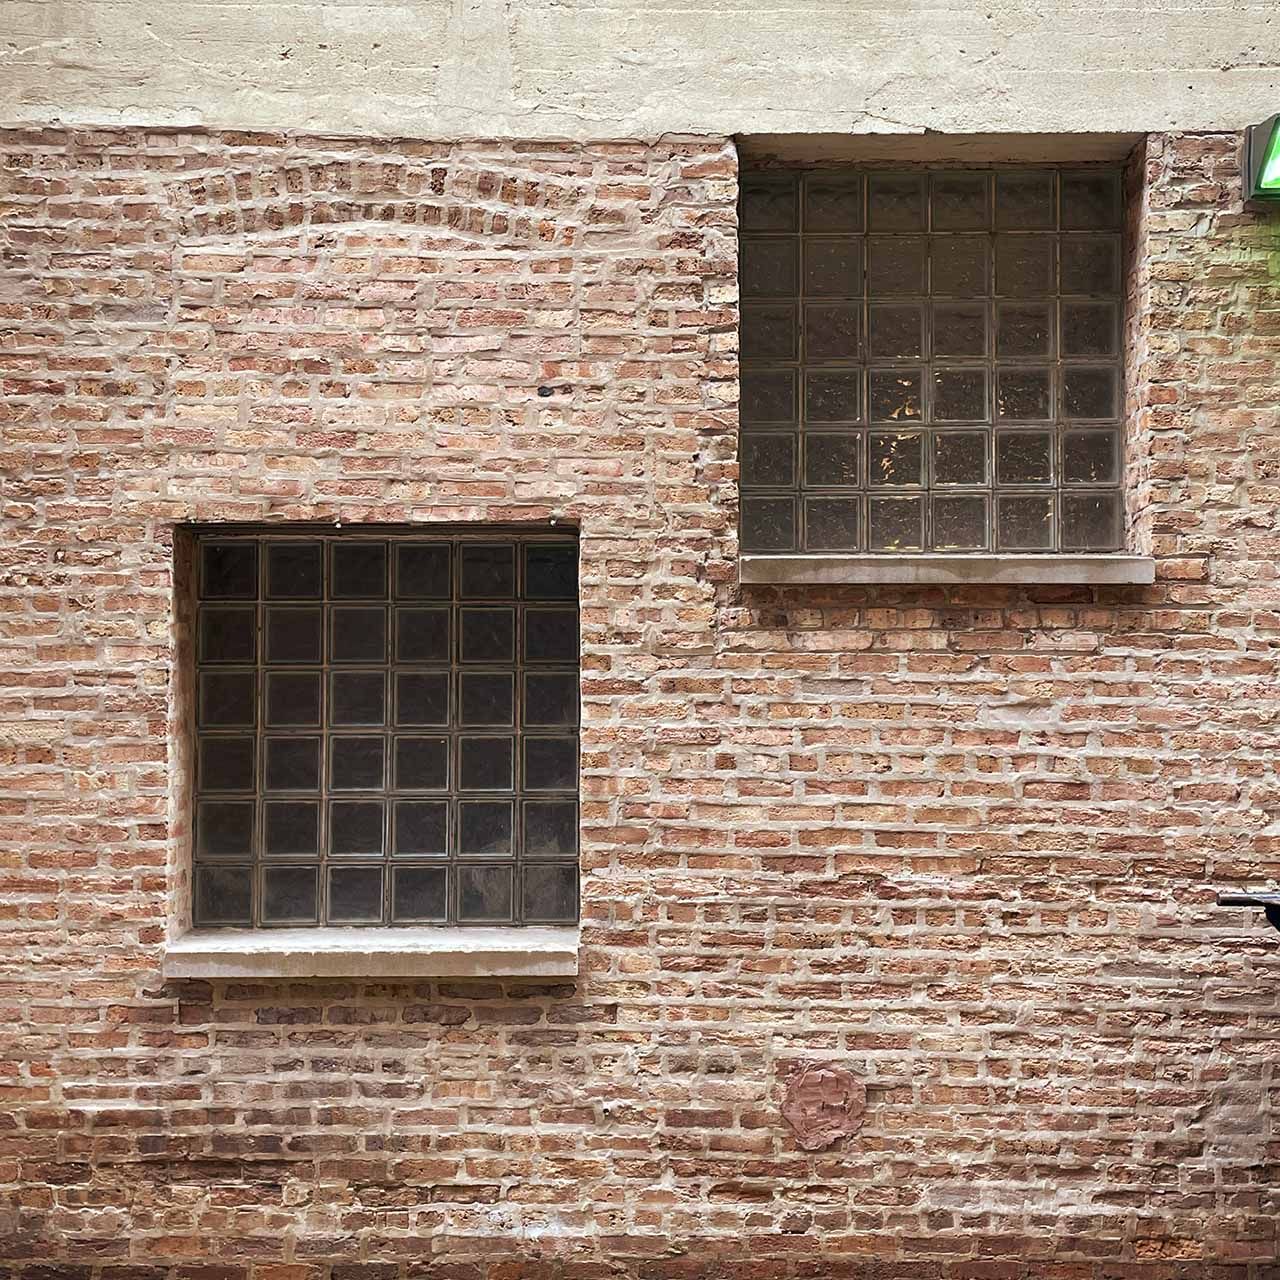 A glass block window in a previously bricked in window